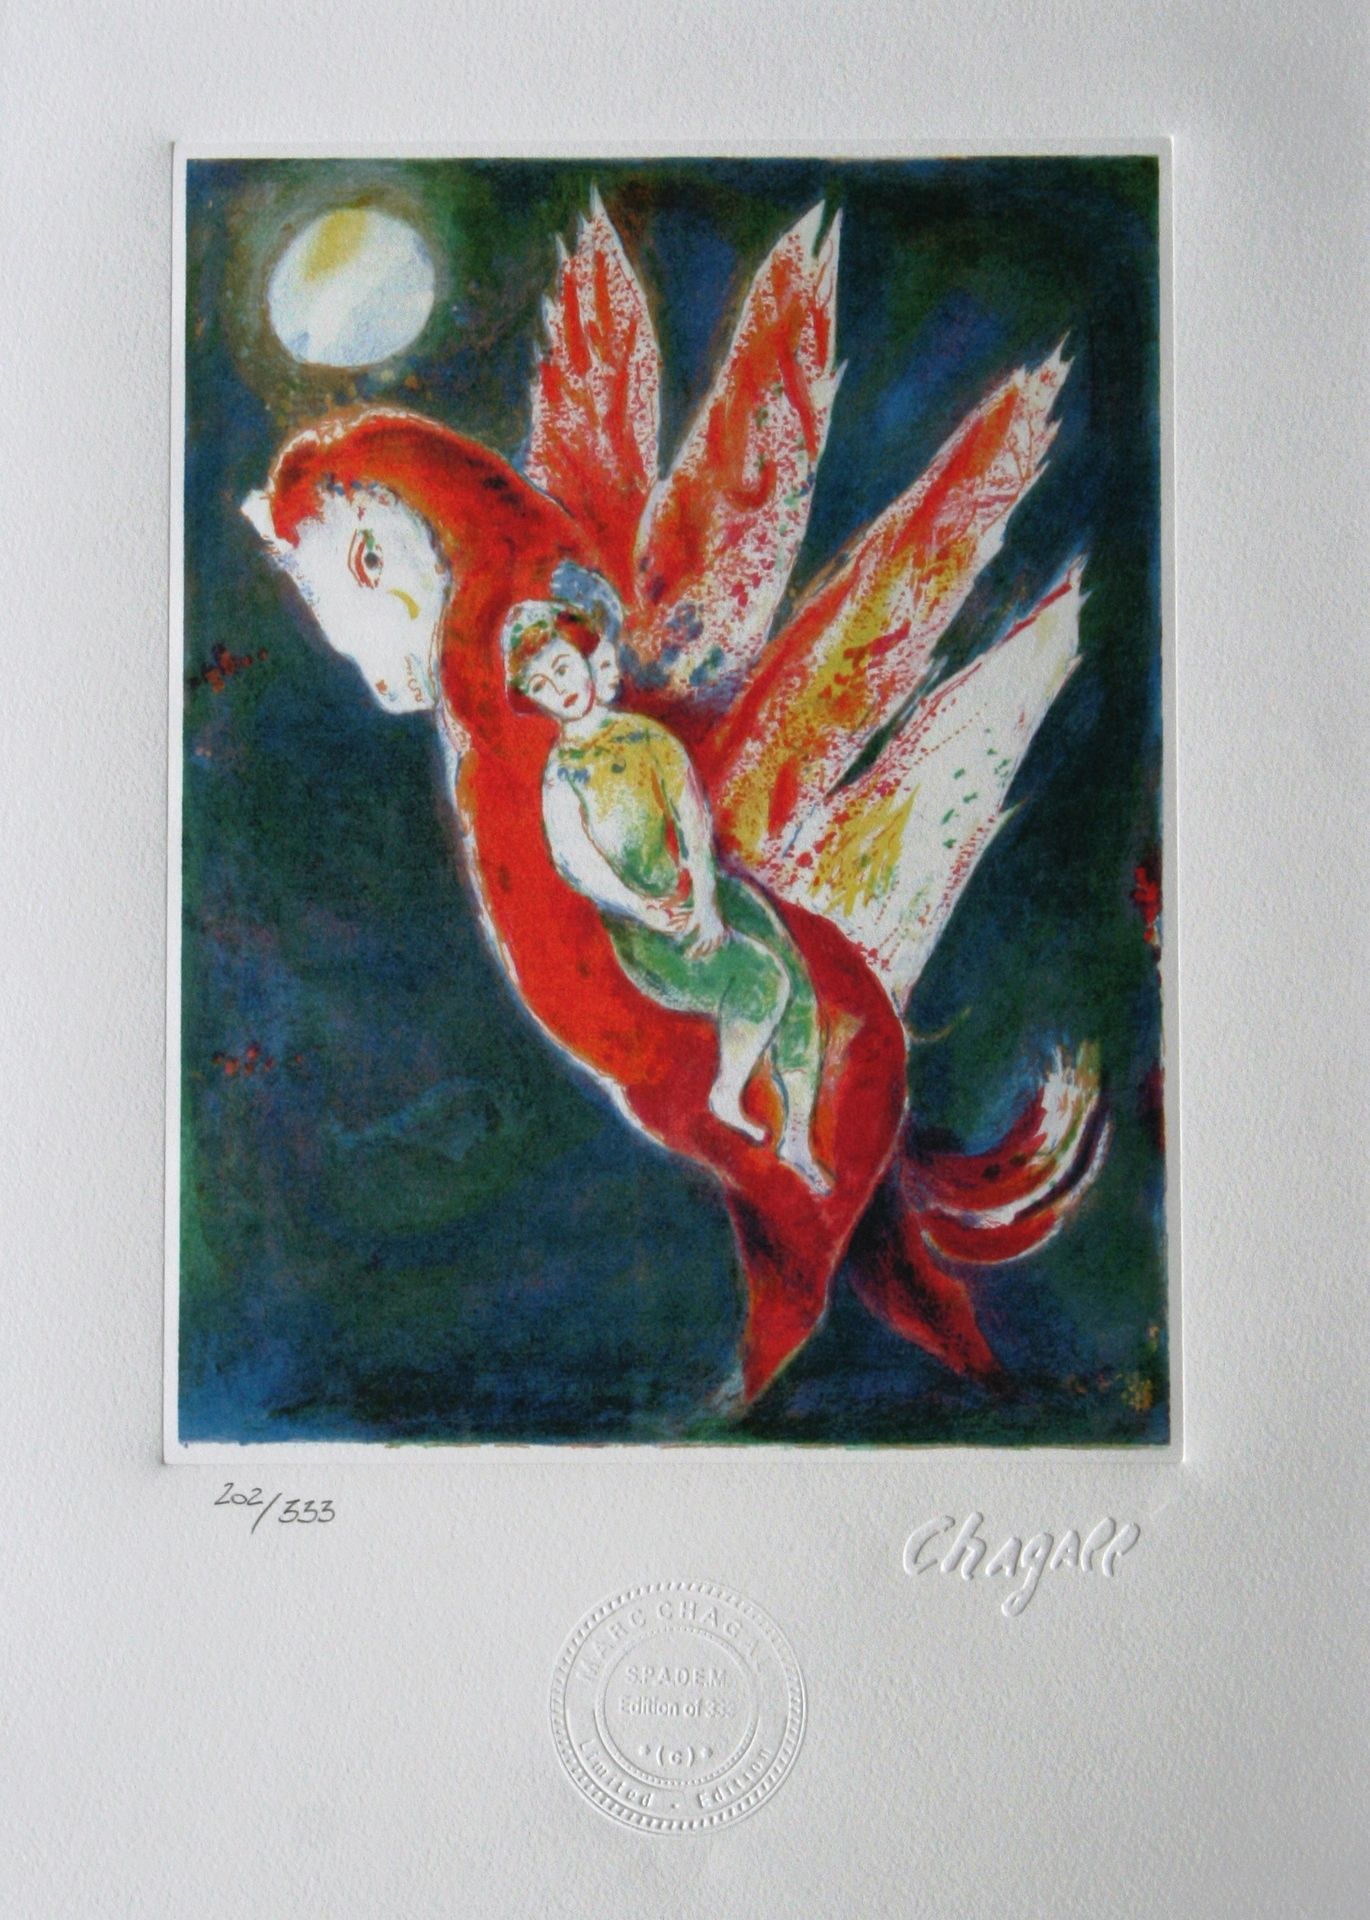 Marc Chagall Marc Chagall (1887-1985)

Arabian Nights, 1985

Lithograph

Numbere&hellip;